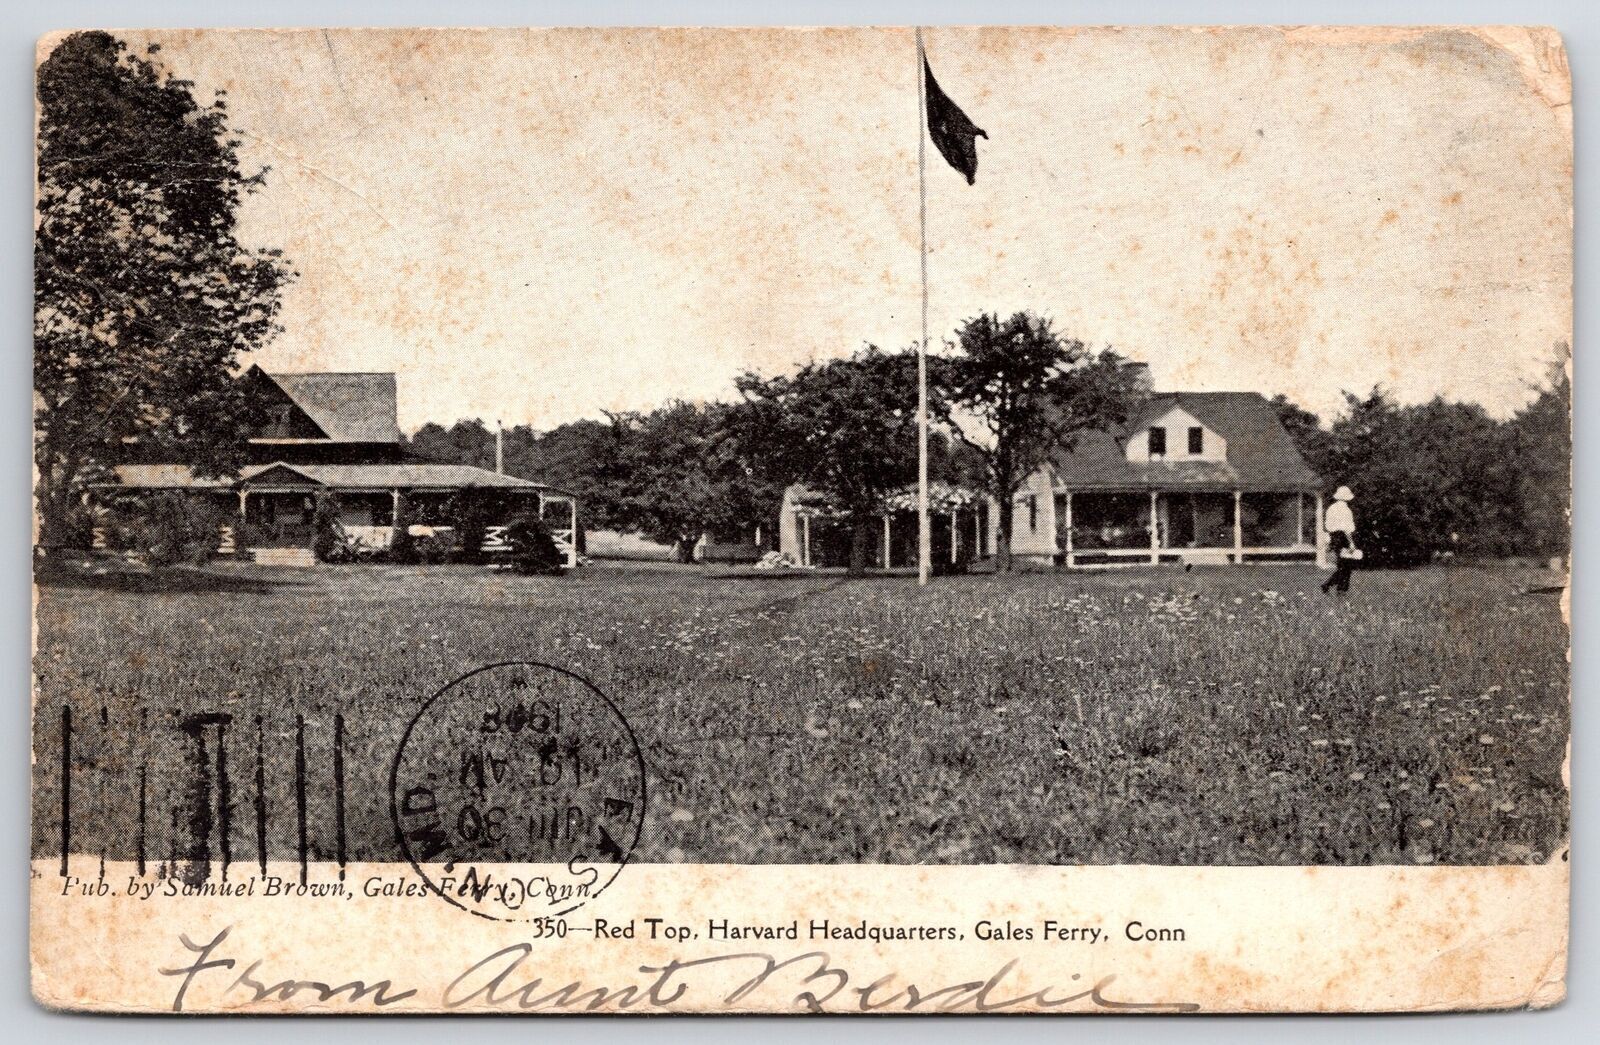 1903 Redtop Harvard Headquarter Gales Ferry Connecticut Flagpole Posted Postcard